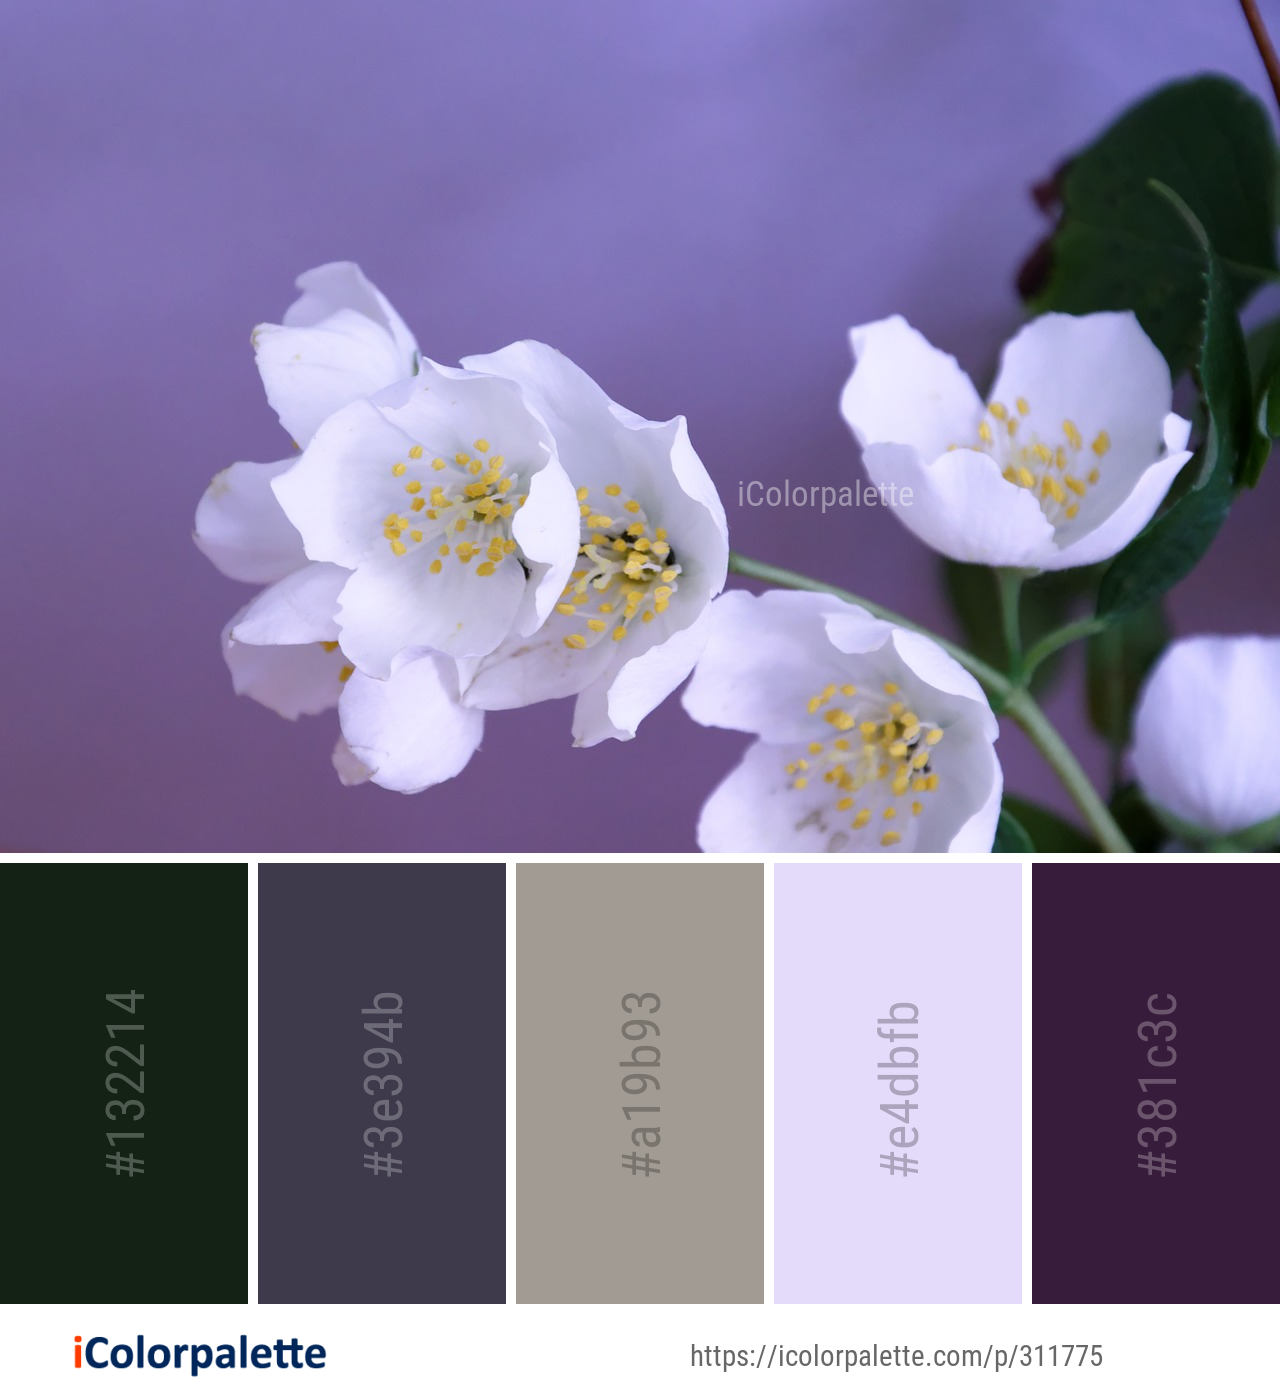 Color Palette Ideas from Flower White Flora Image | iColorpalette